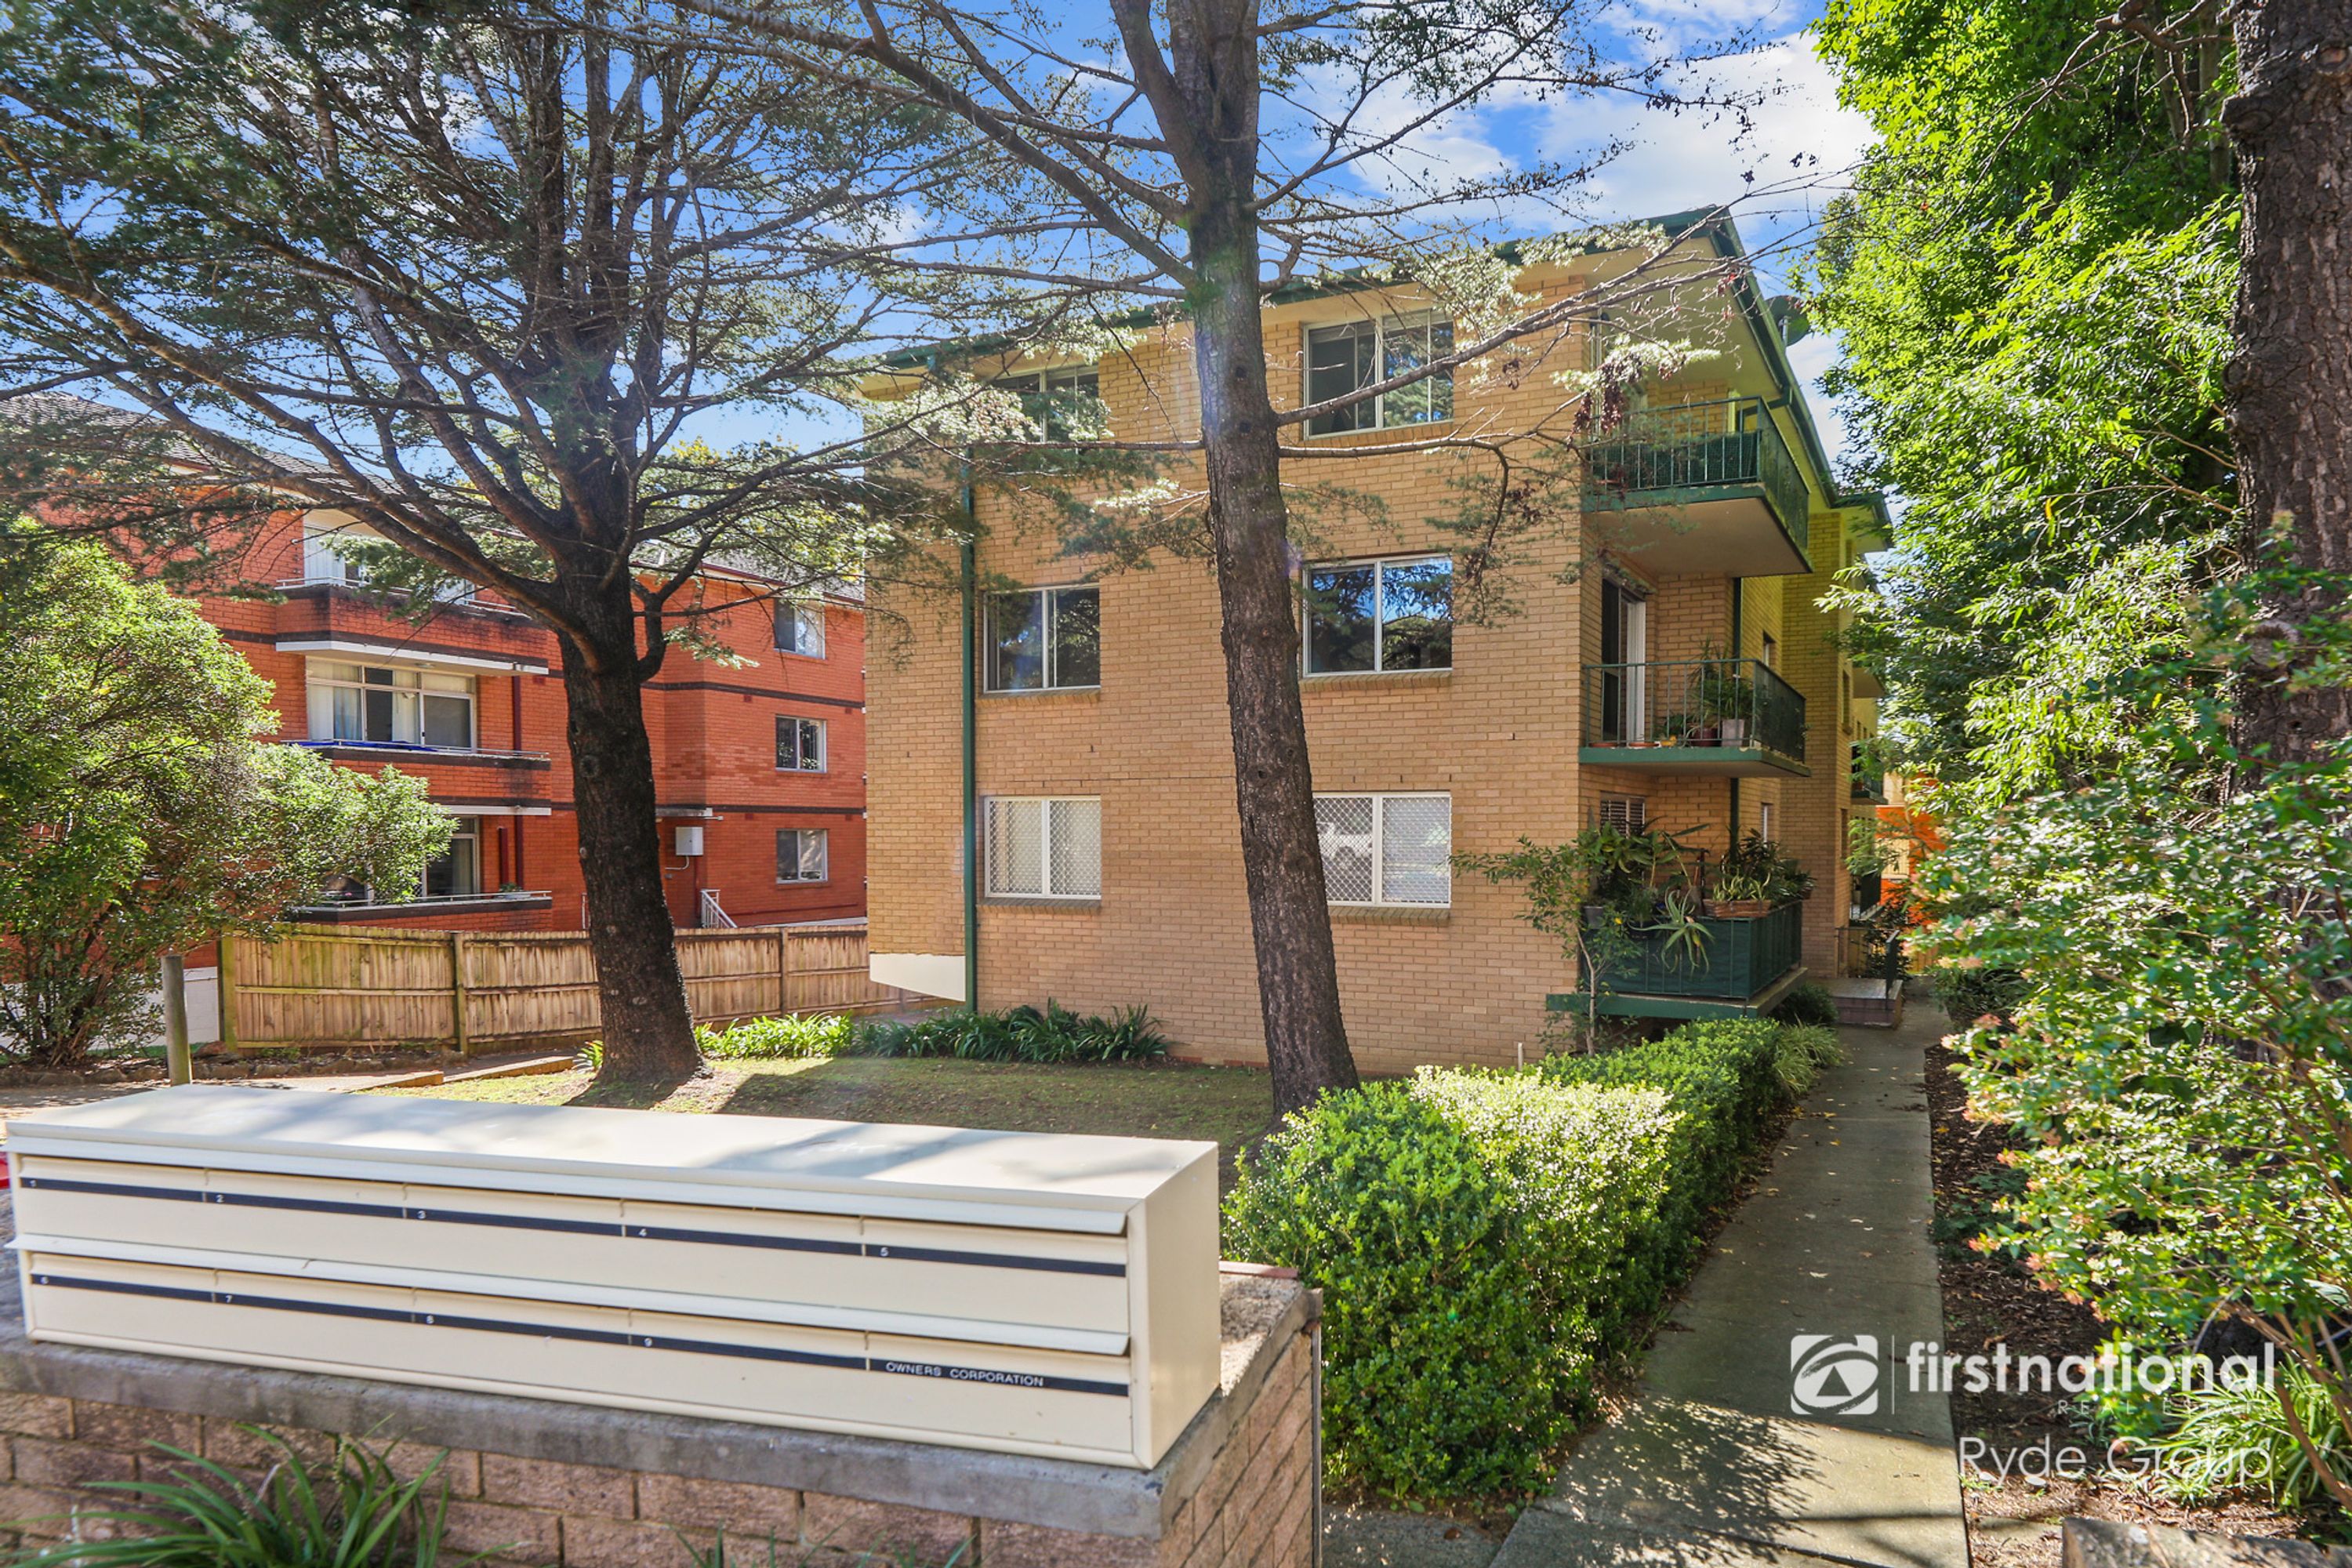 3/13 Curzon Street, Ryde, NSW 2112